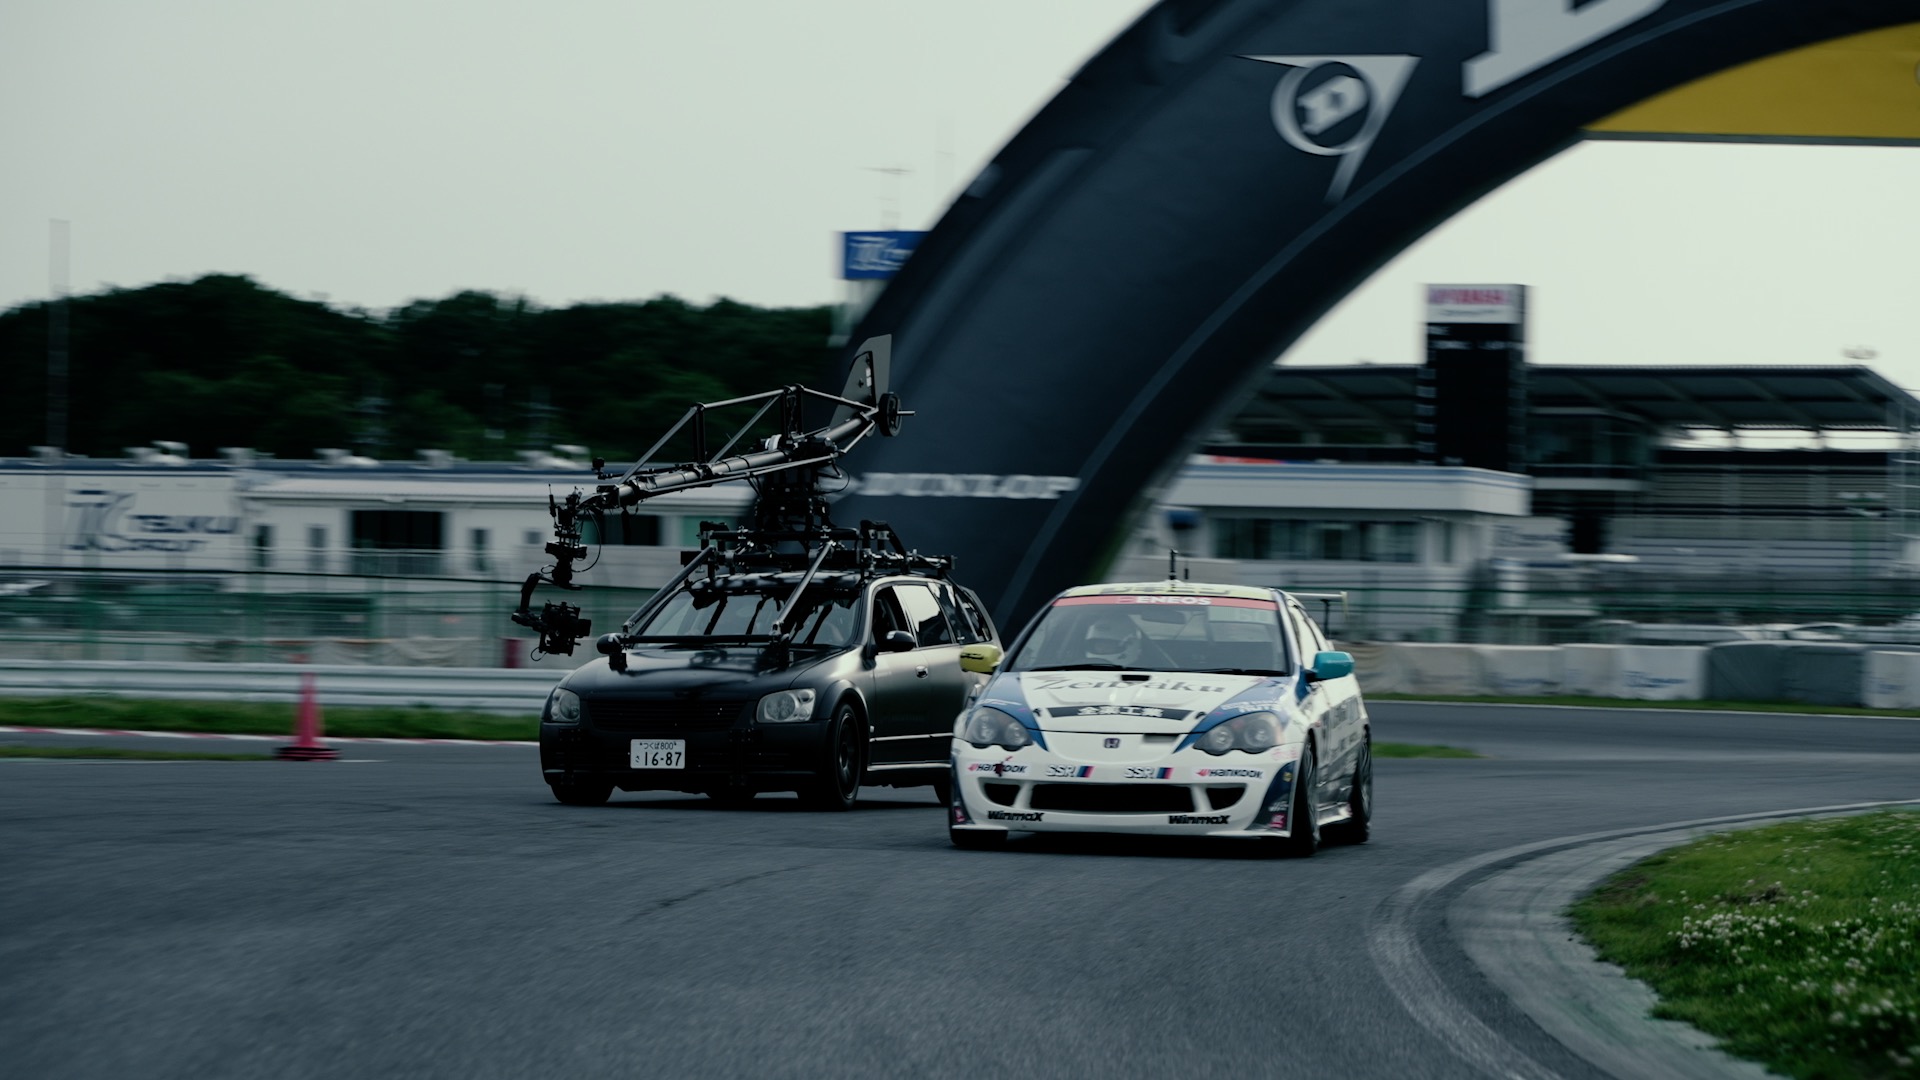 G/MOTION’ x Motocrane PromotionVideo  | This is the shooting scene. | 1st Festa, The films nominated.